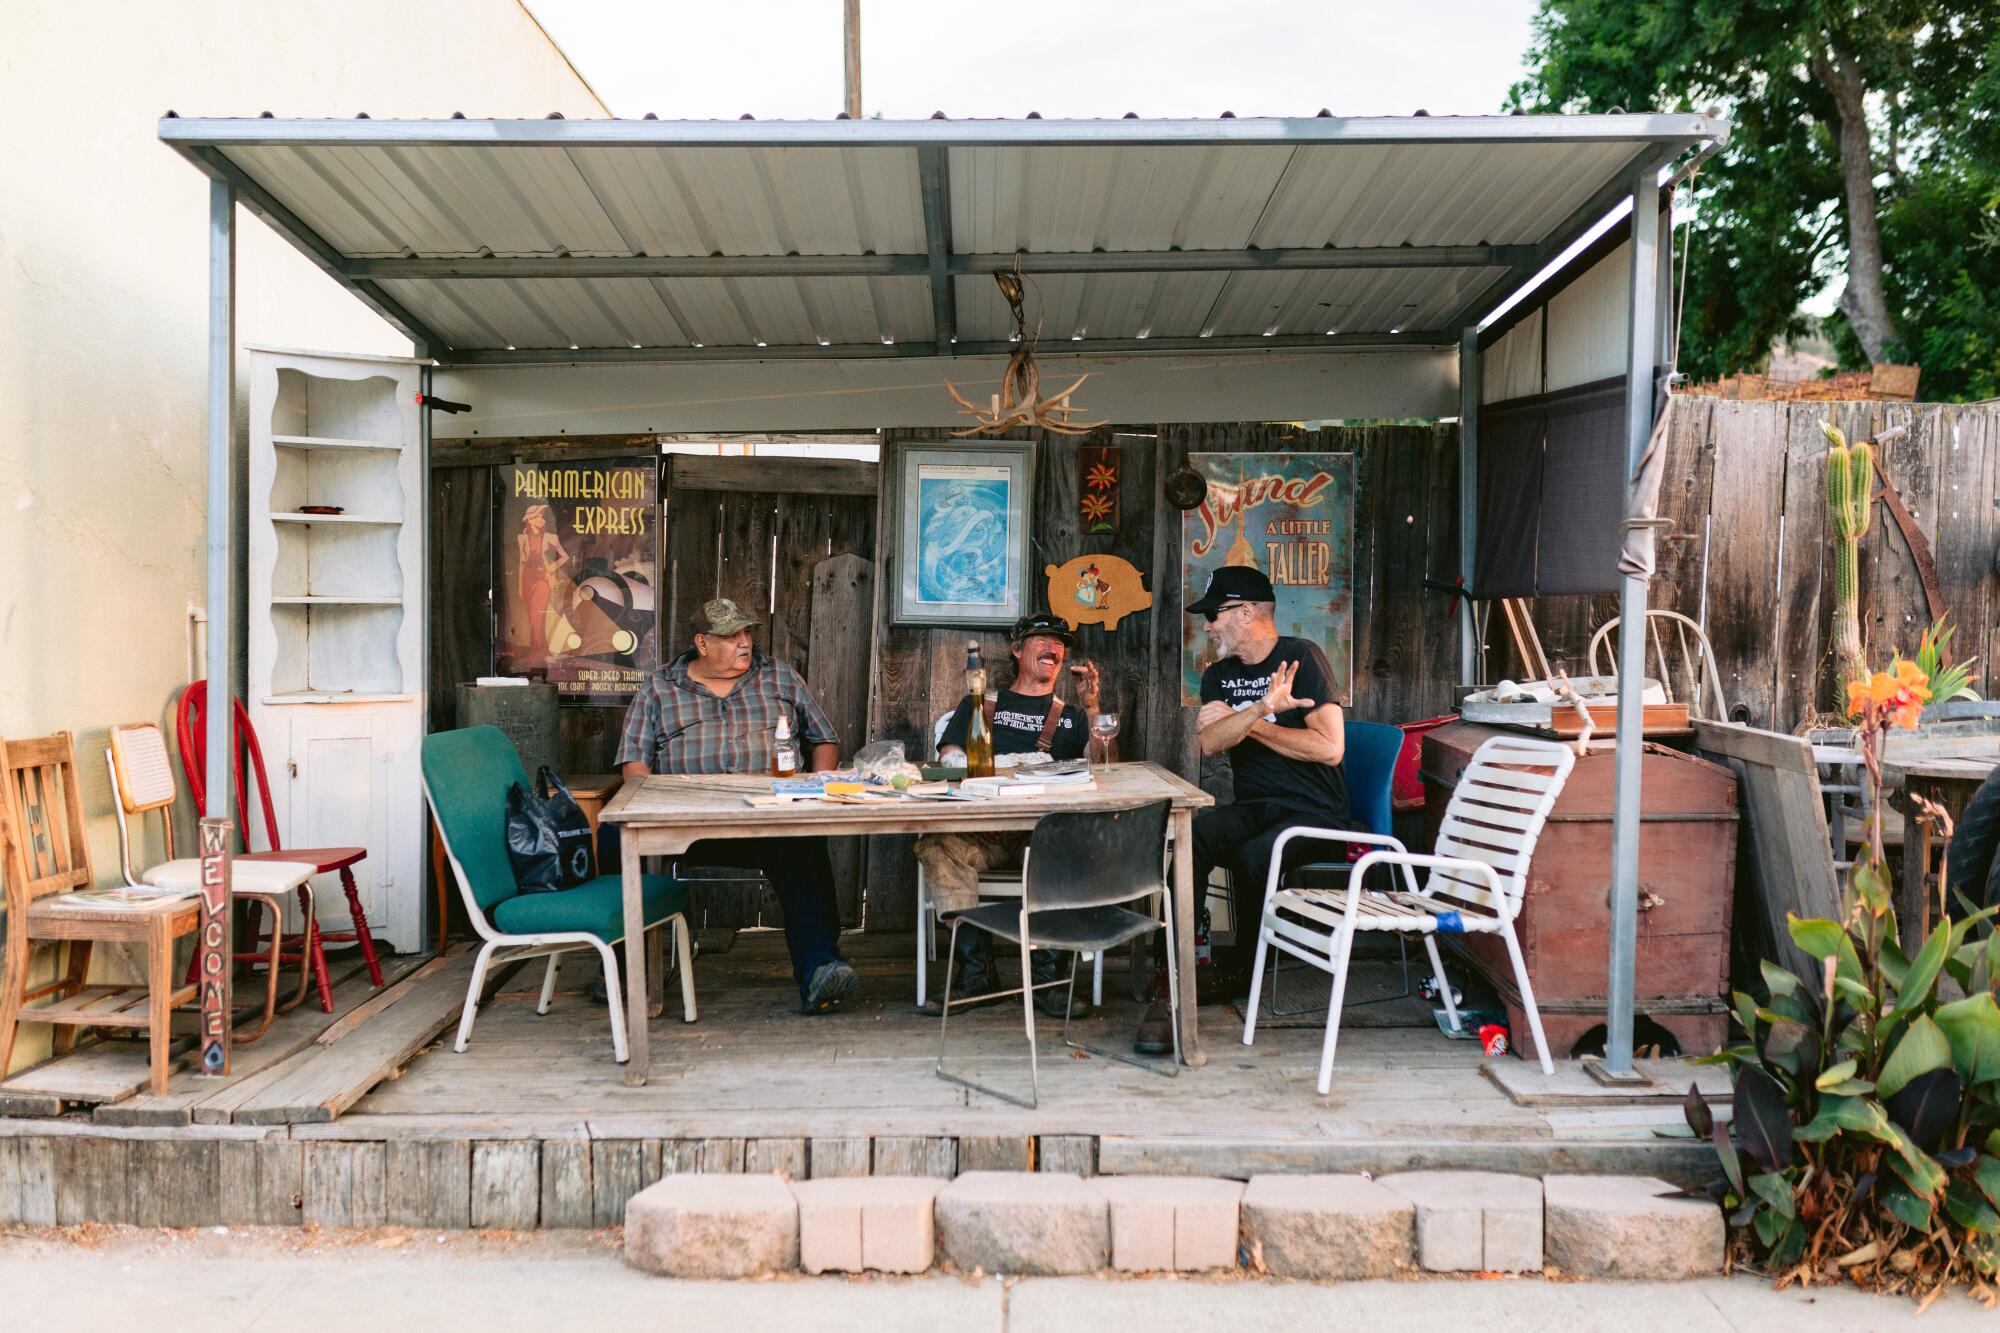 Three men sit at a sheltered table off a sidewalk in a small town.